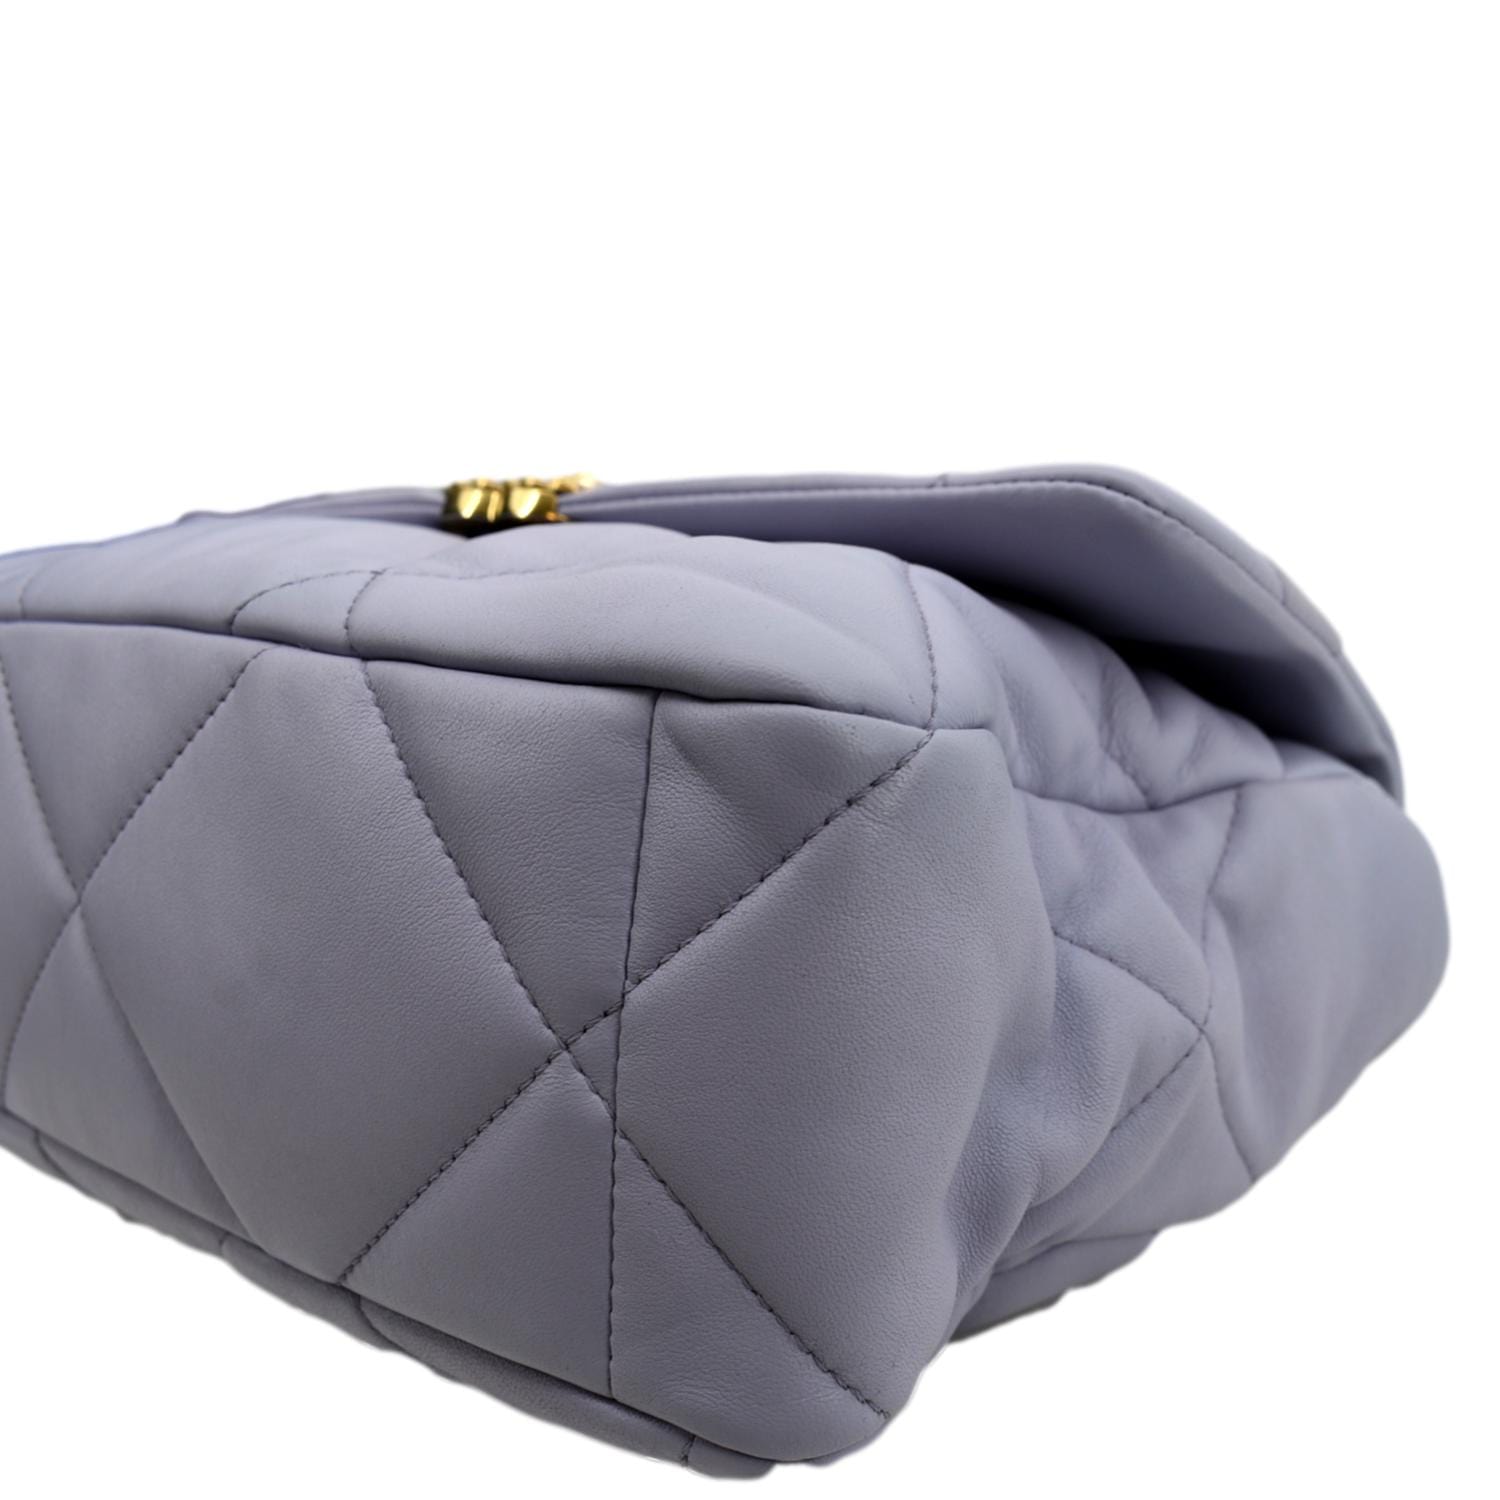 Exquisite New Chanel 19 Pouch/ Wallet in purple quilted lambskin leather ,  GHW For Sale at 1stDibs